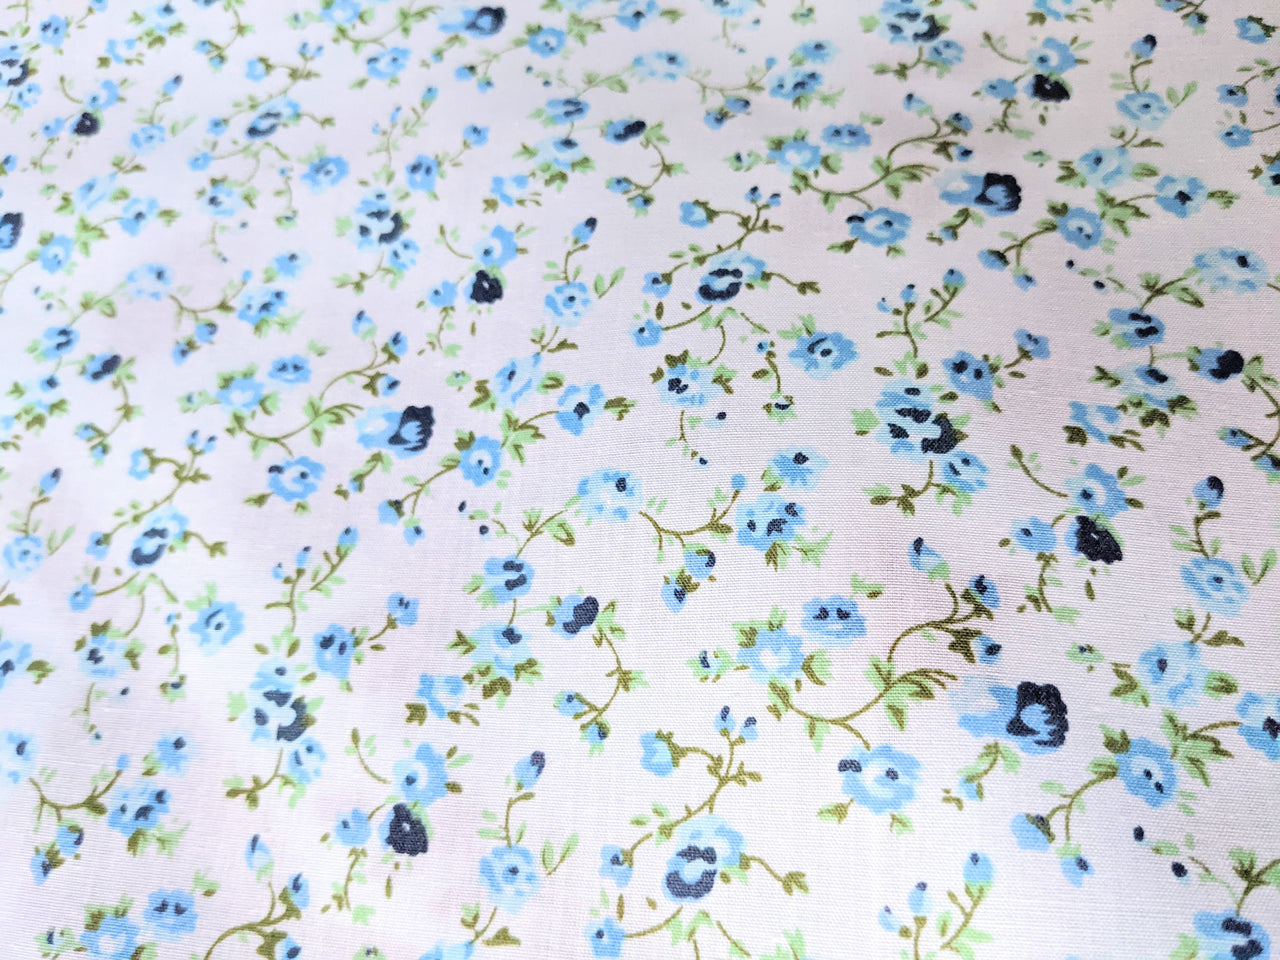 Blue Poly Cotton Rose Fabric, Floral Fabric, Small Print Fabric